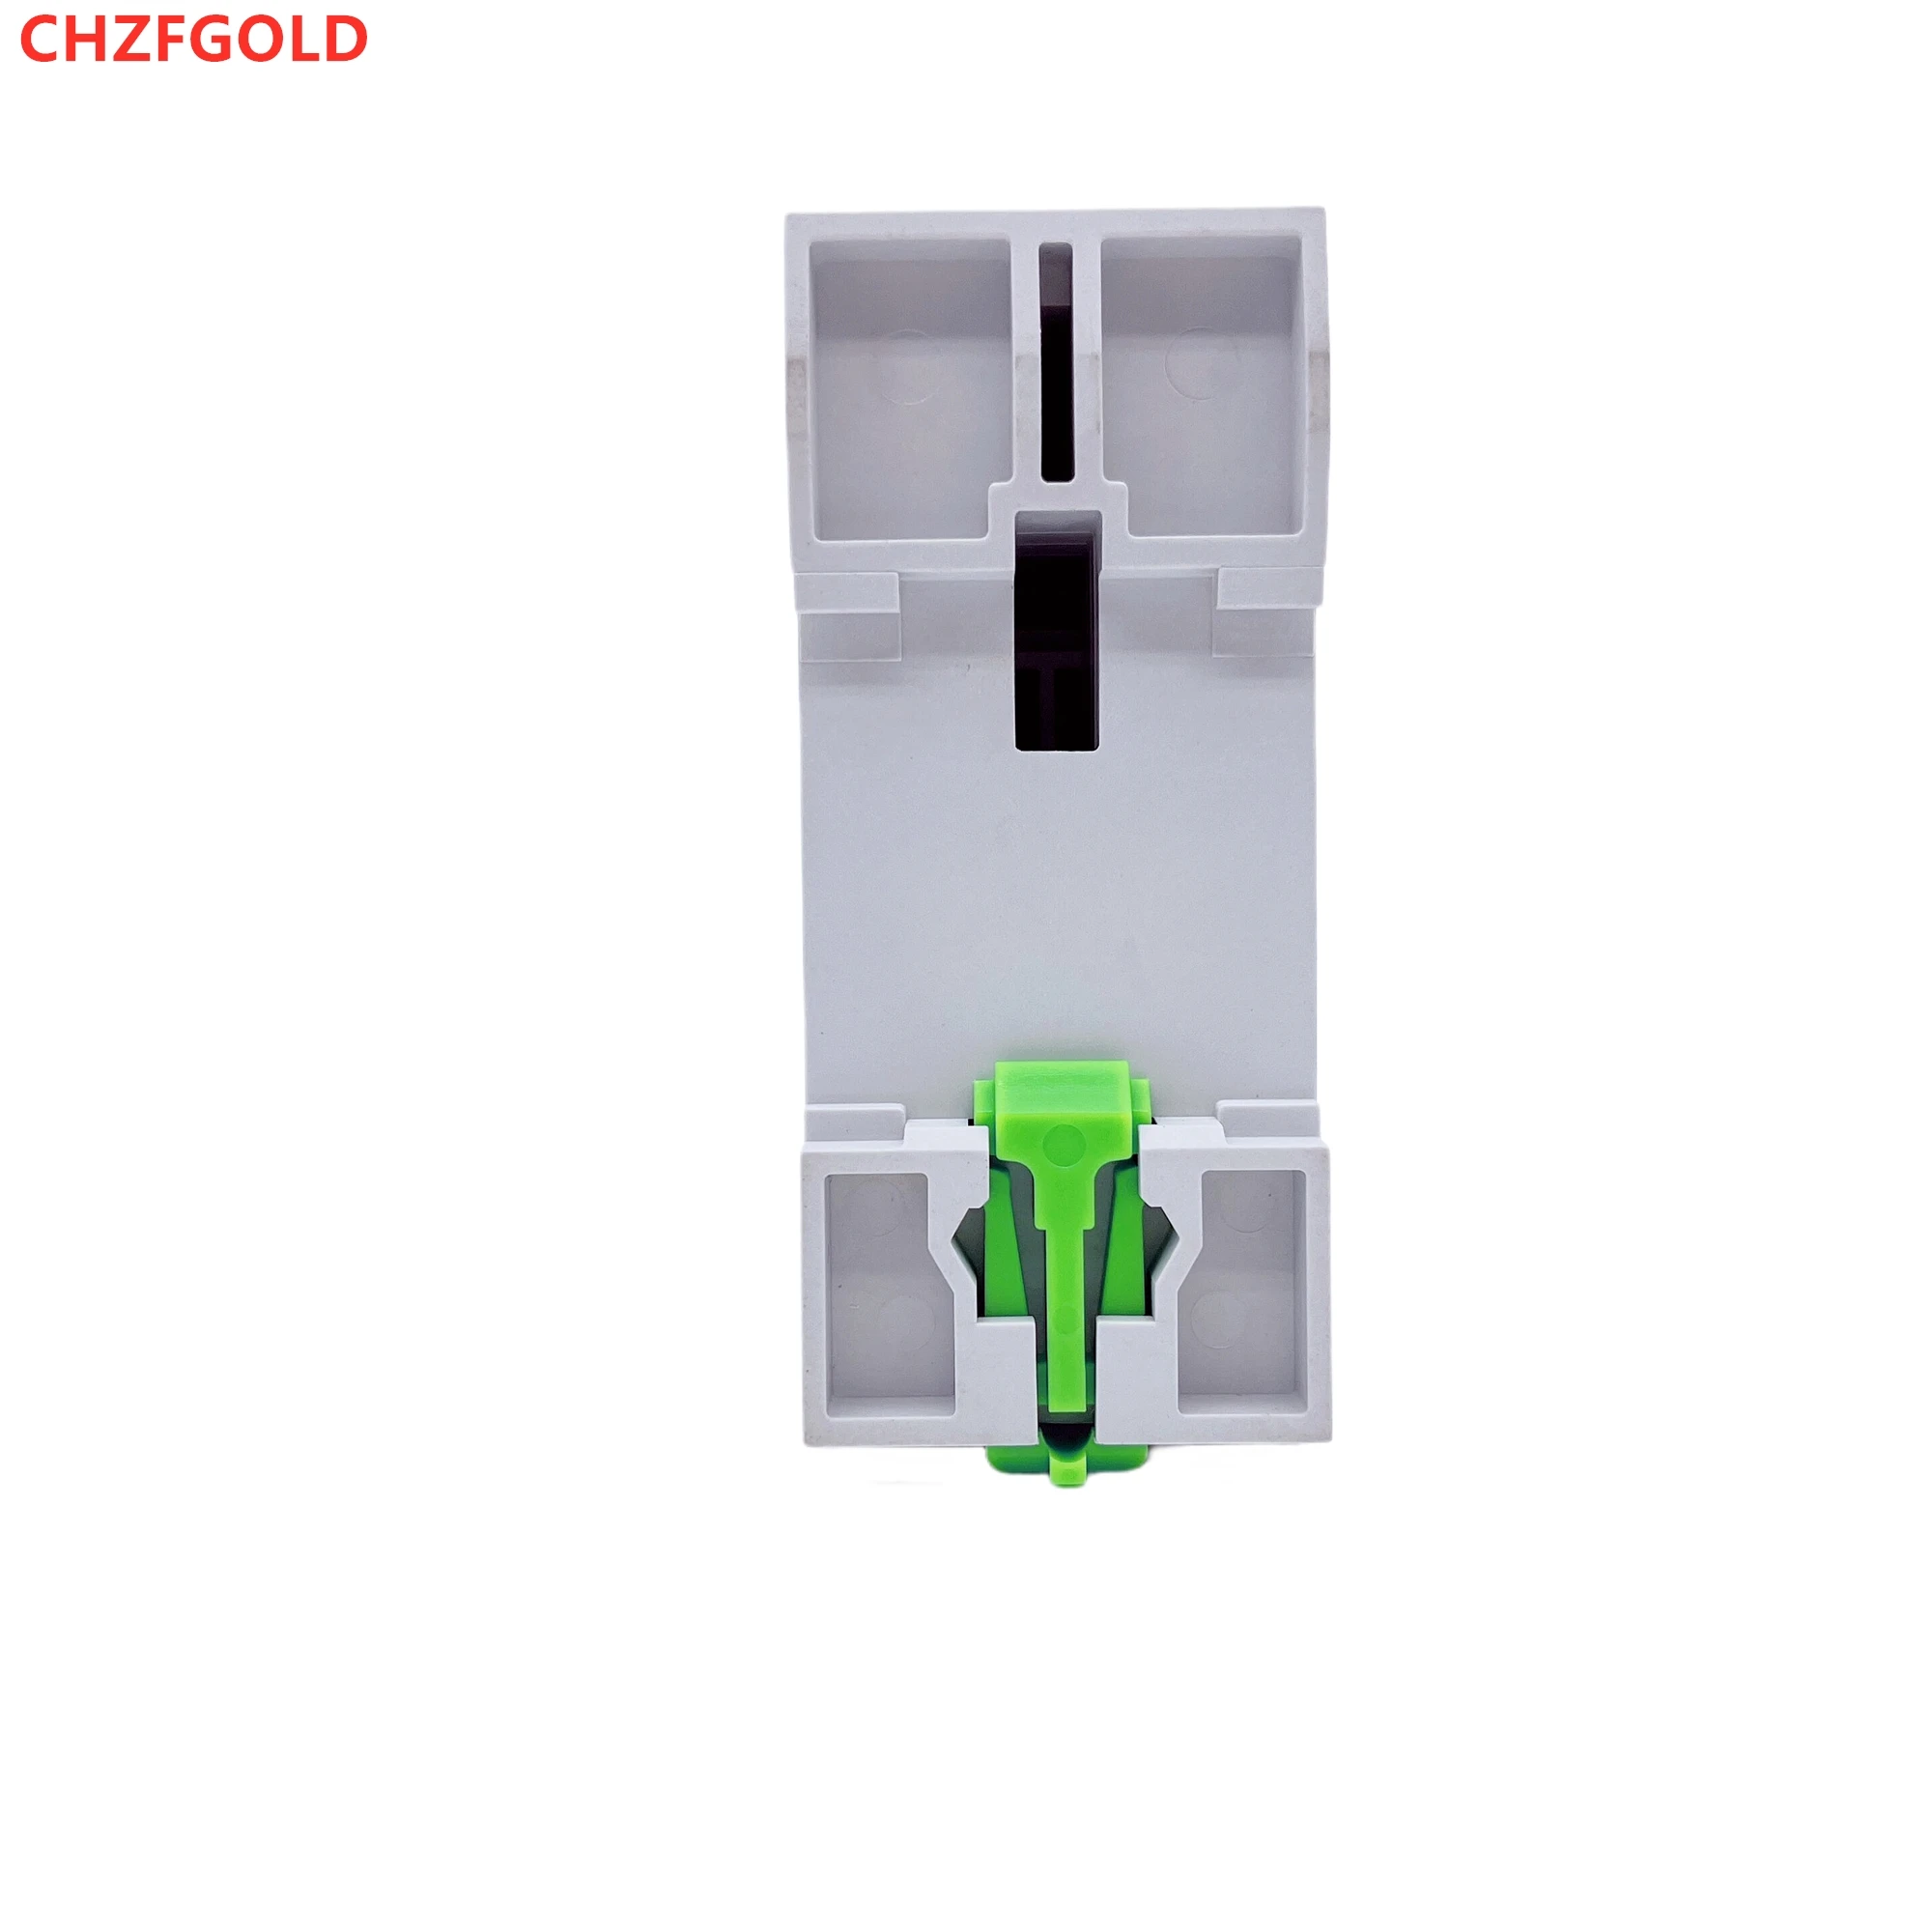 Electric Vehicle EV Charging Pile Residual Current breaker DC RCCB RCD 2P 63A 30mA Type B 6KA CHZFGOLD Din Rail Earth Leakage images - 6